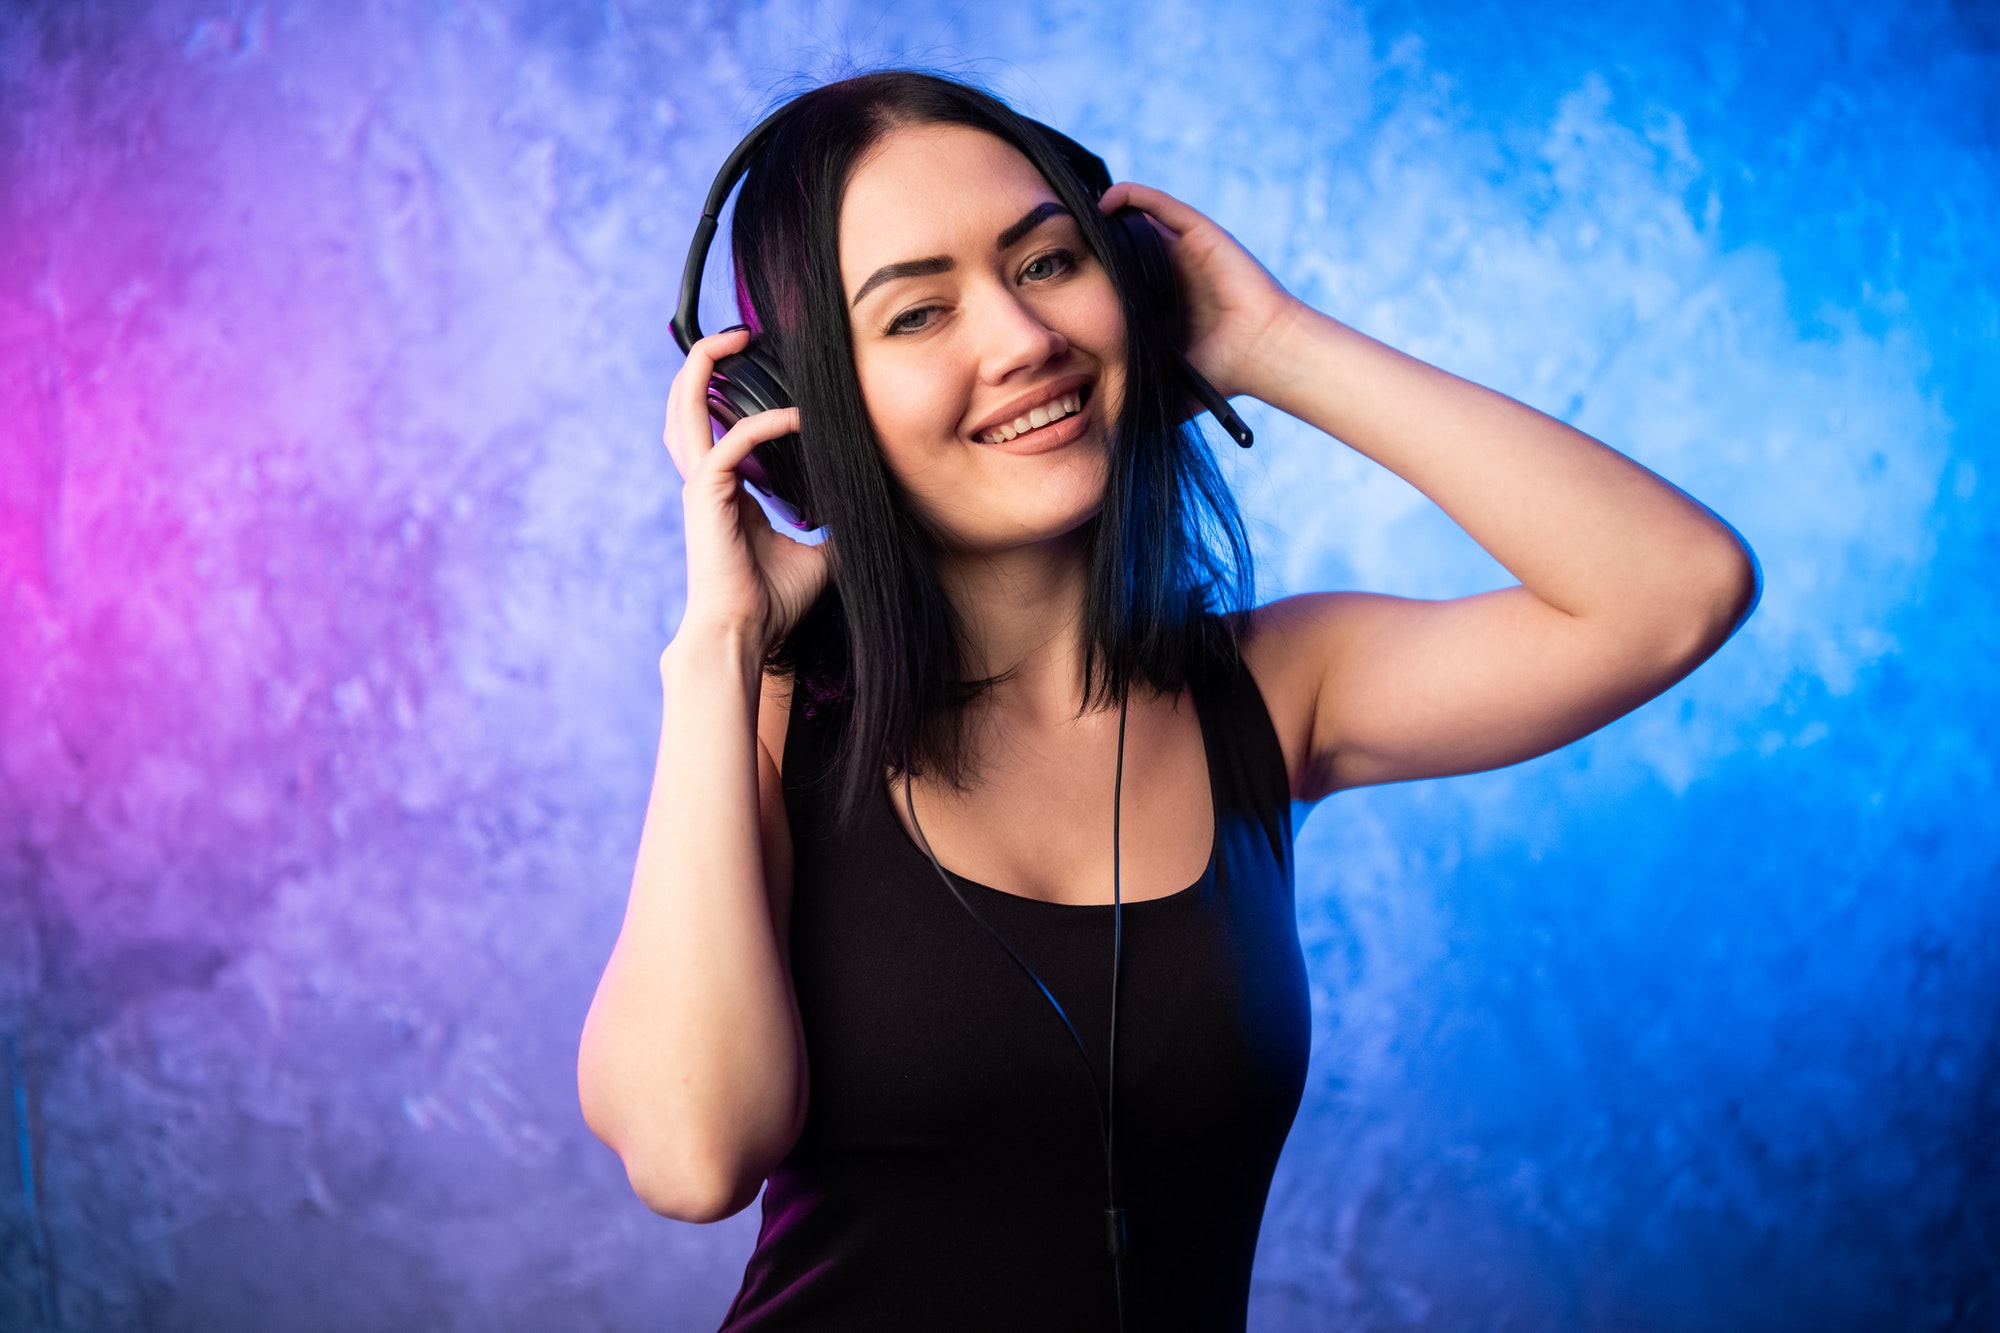 Colorful portrait in blue and pink ligth of a young DJ woman wearing headset and enjoying an